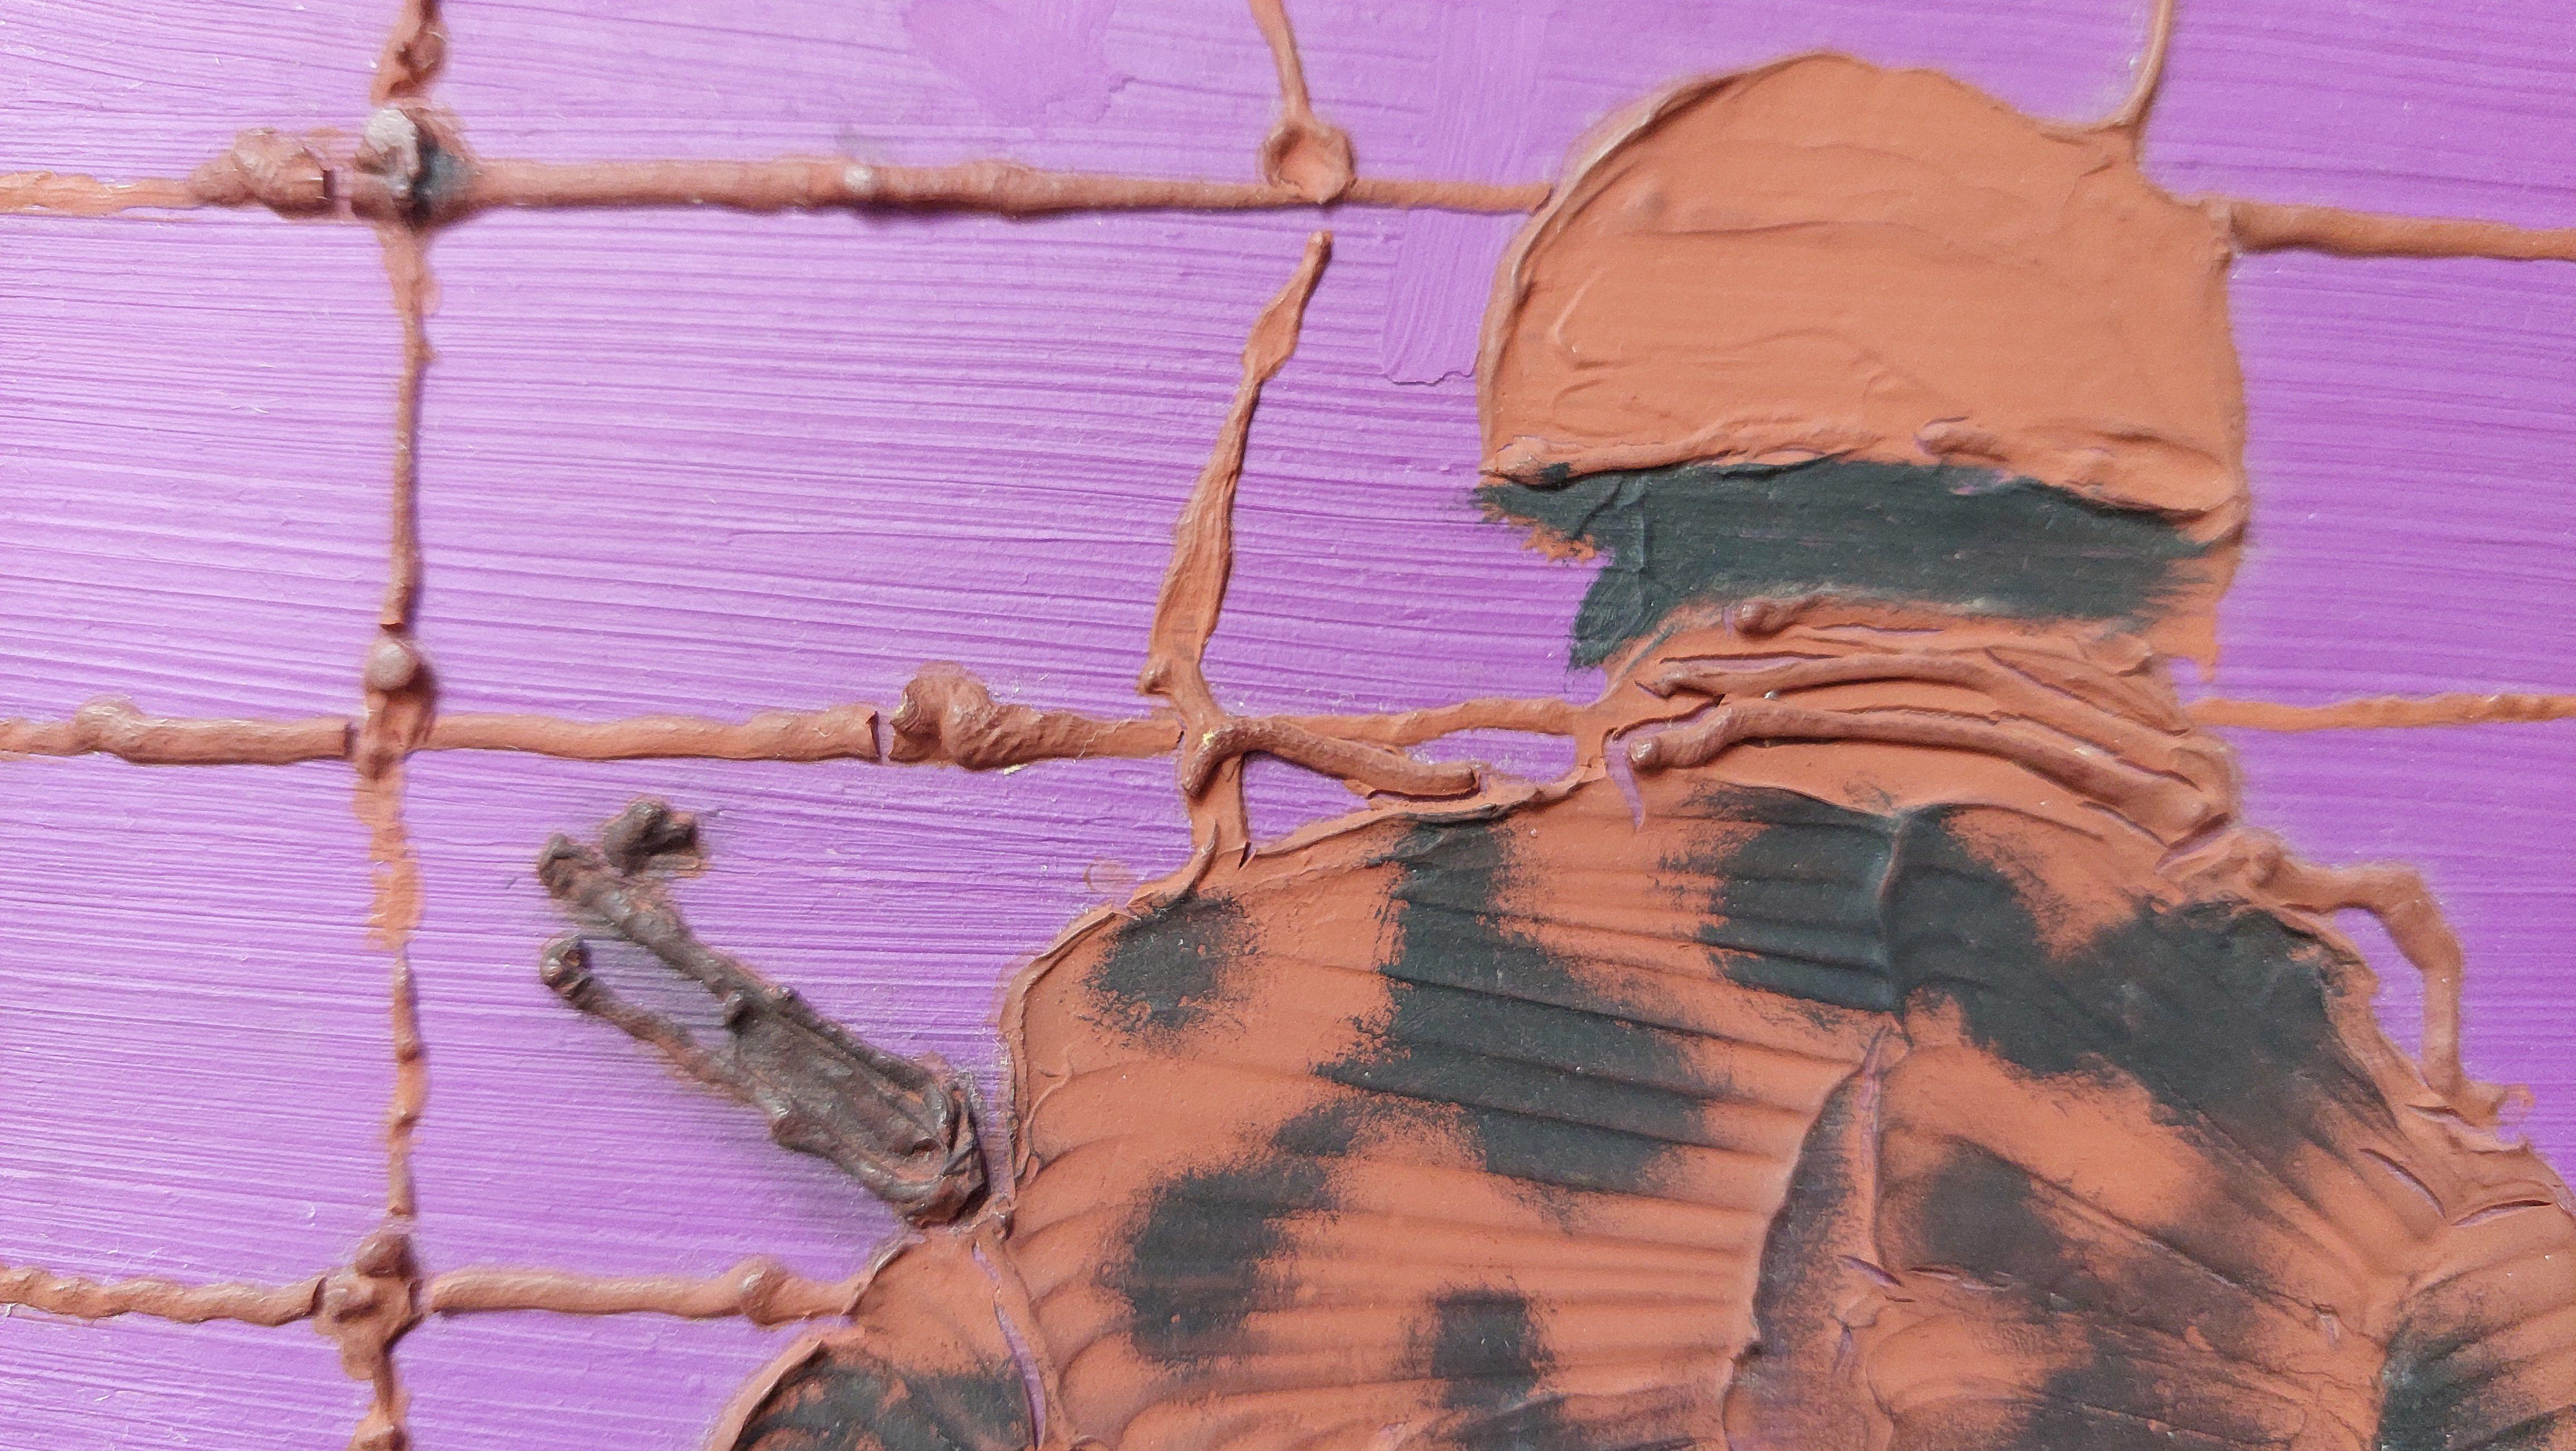 Soldier. 1950.  Cardboard, author technique, 39,5x20 cm
Artwork depicts a soldier in motion. Author has used a mixed media technique on cardboard. Both the soldier himself and the fence visible in the background are textured. Purple and turquoise